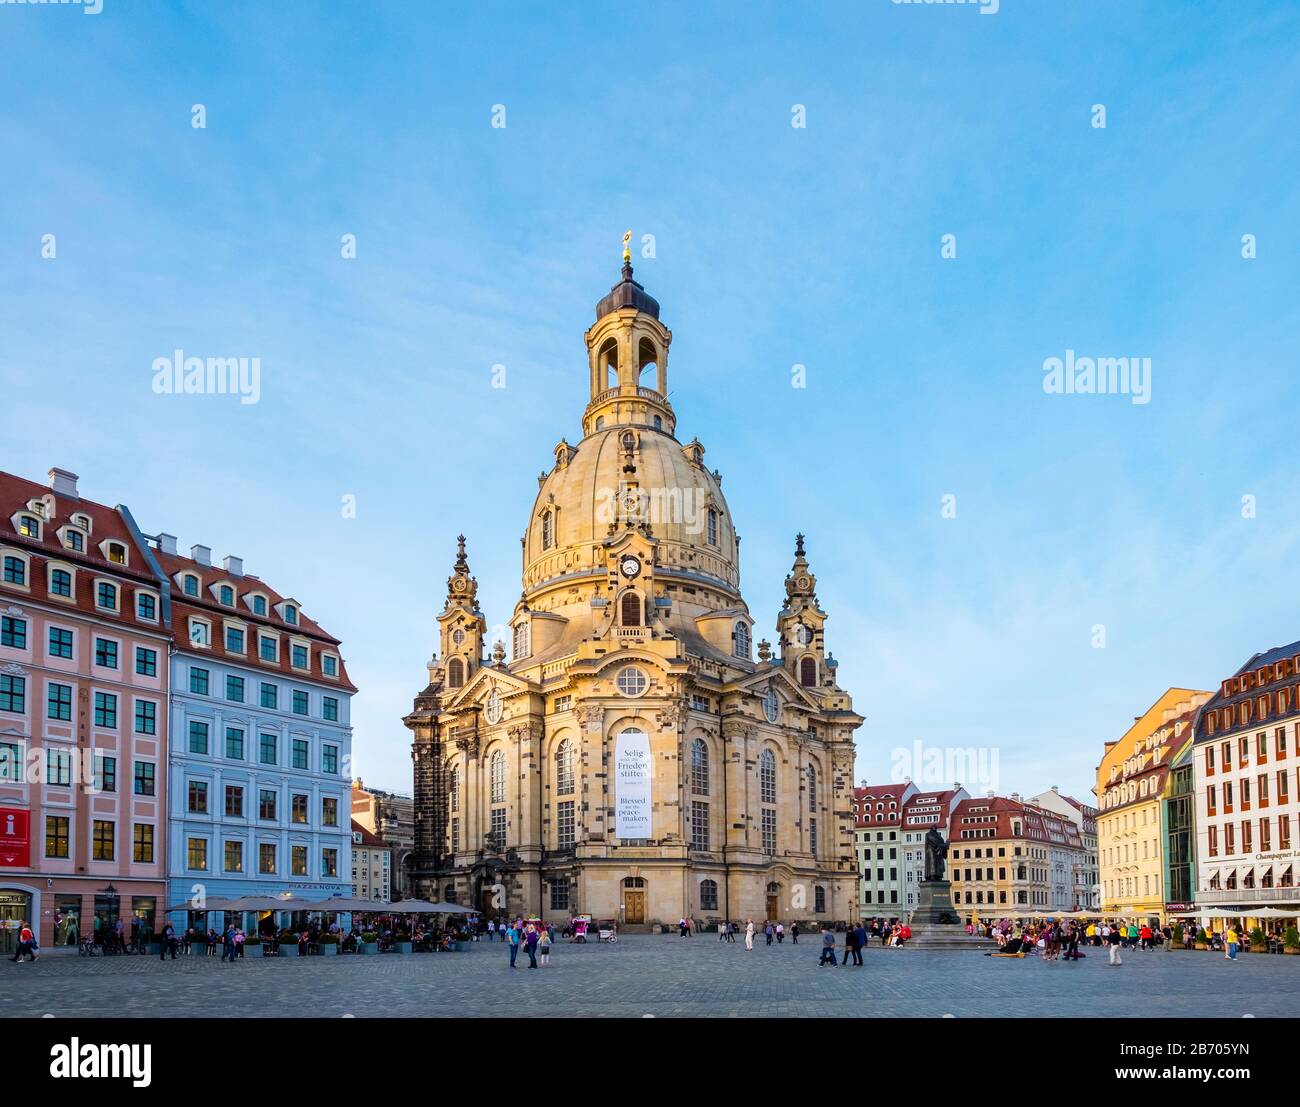 Germany, Saxony, Dresden, Altstadt (Old Town). Dresdner Frauenkirche (Church of Our Lady) and buildings on the Neumarkt. Stock Photo